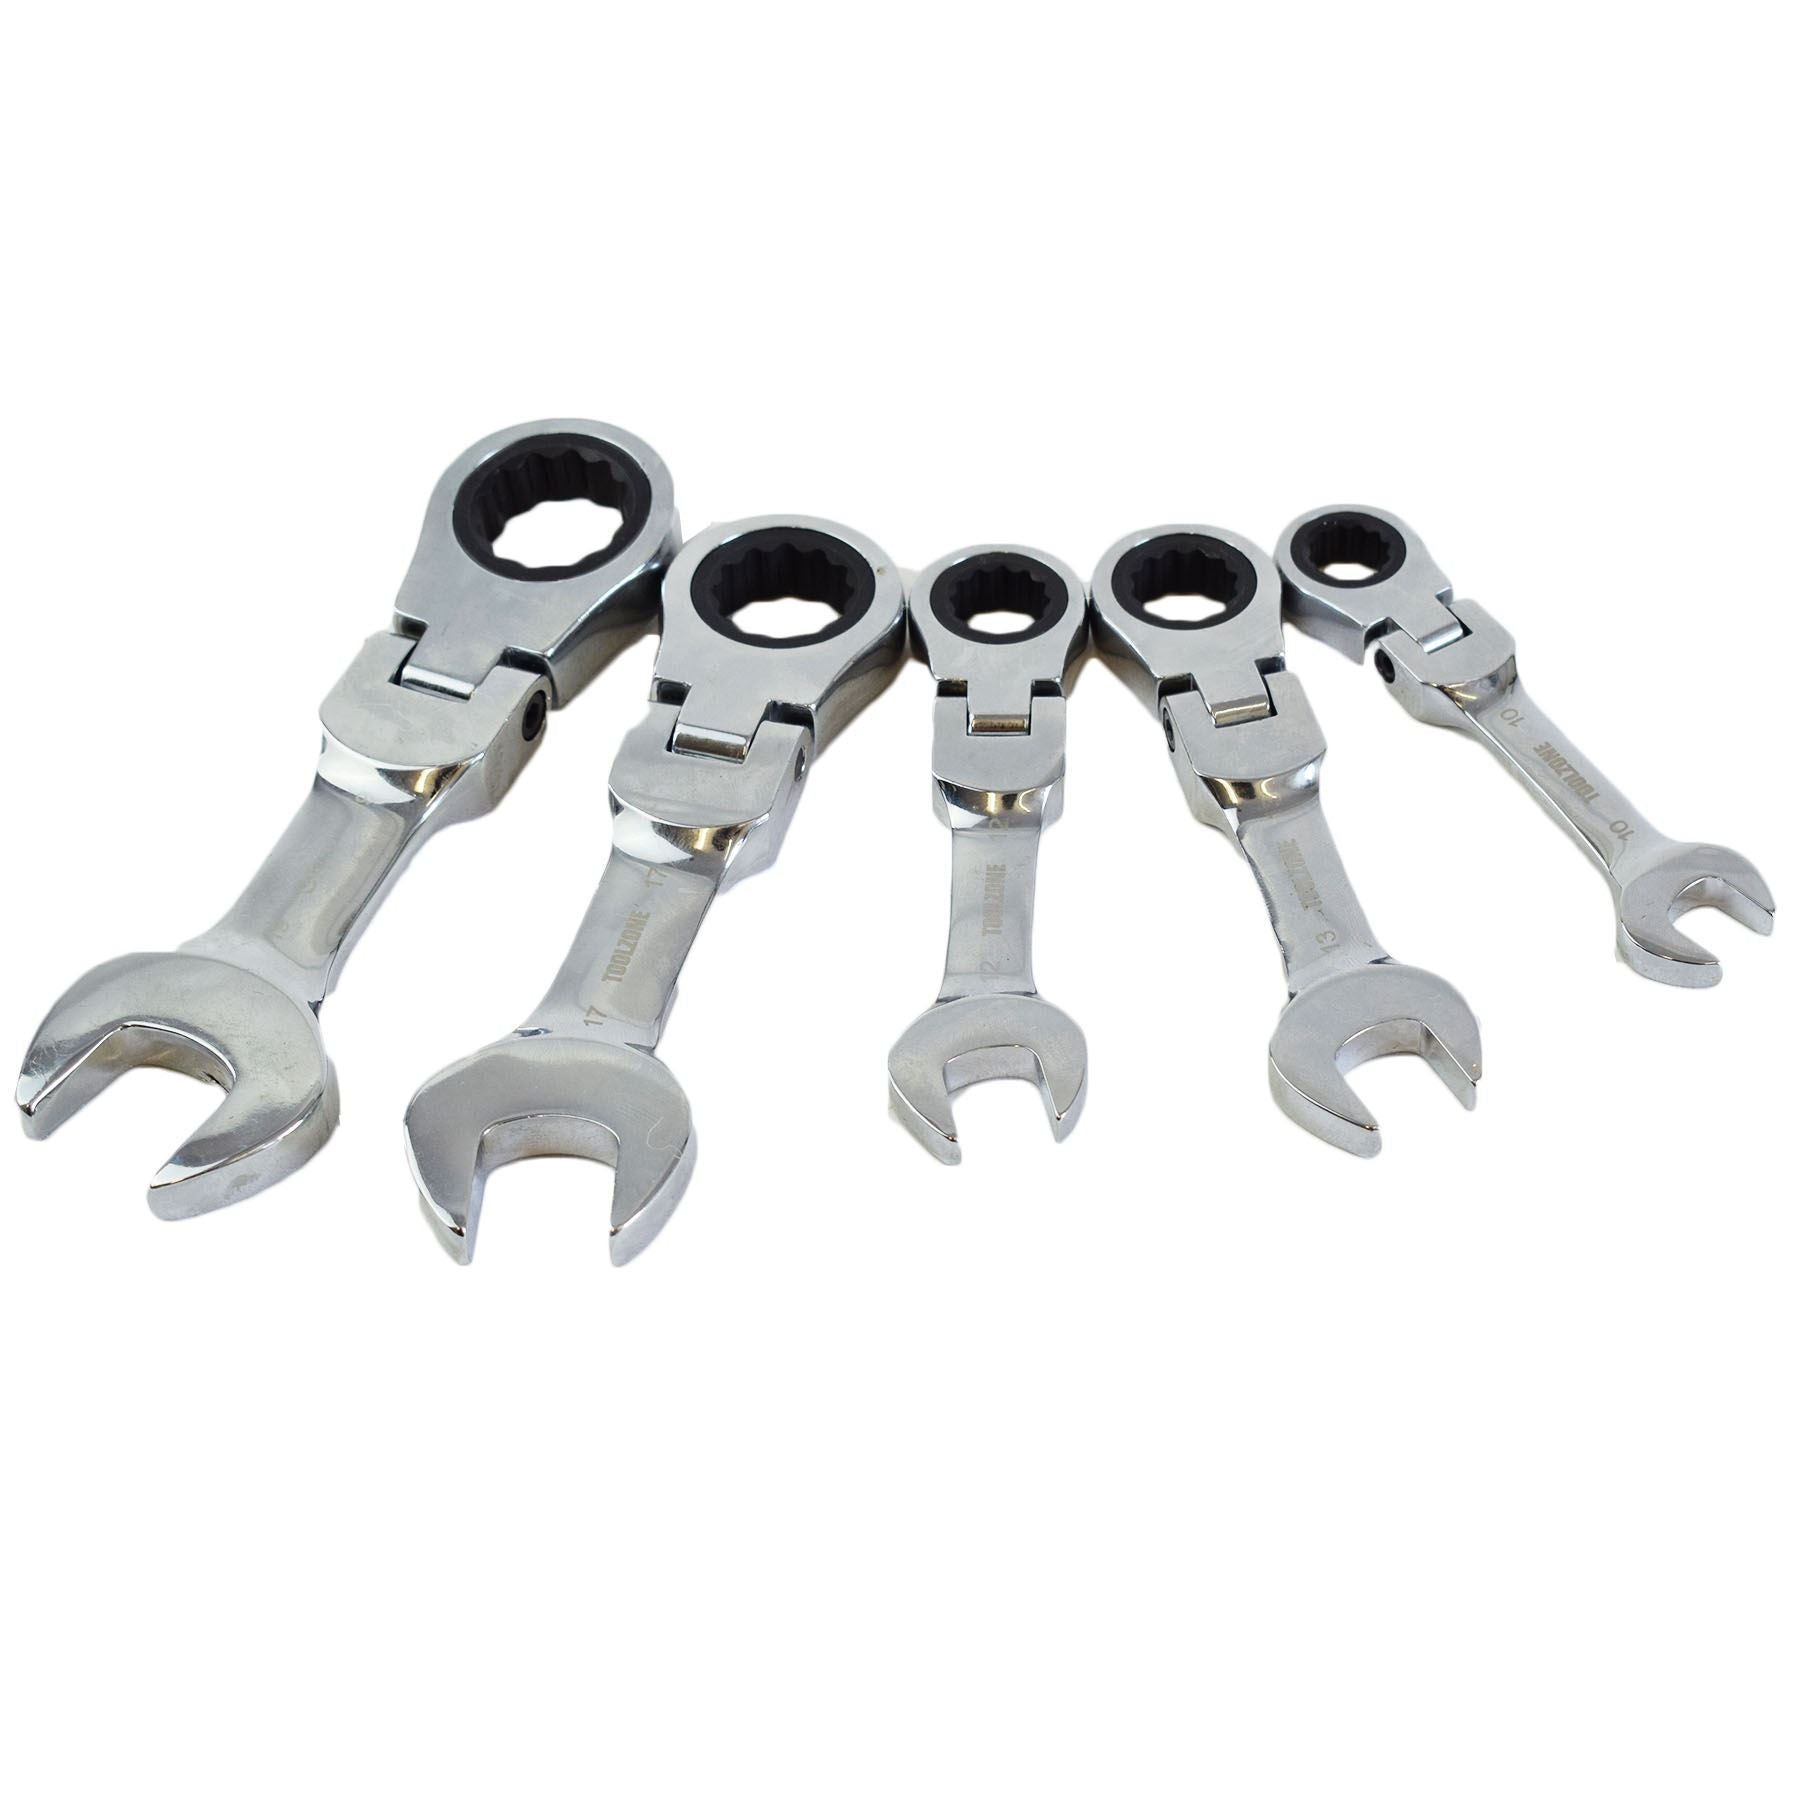 5pc Flexi Stubby Ratchet Spanner 10-19mm Metric Wrench Geared 72 Teeth CRV